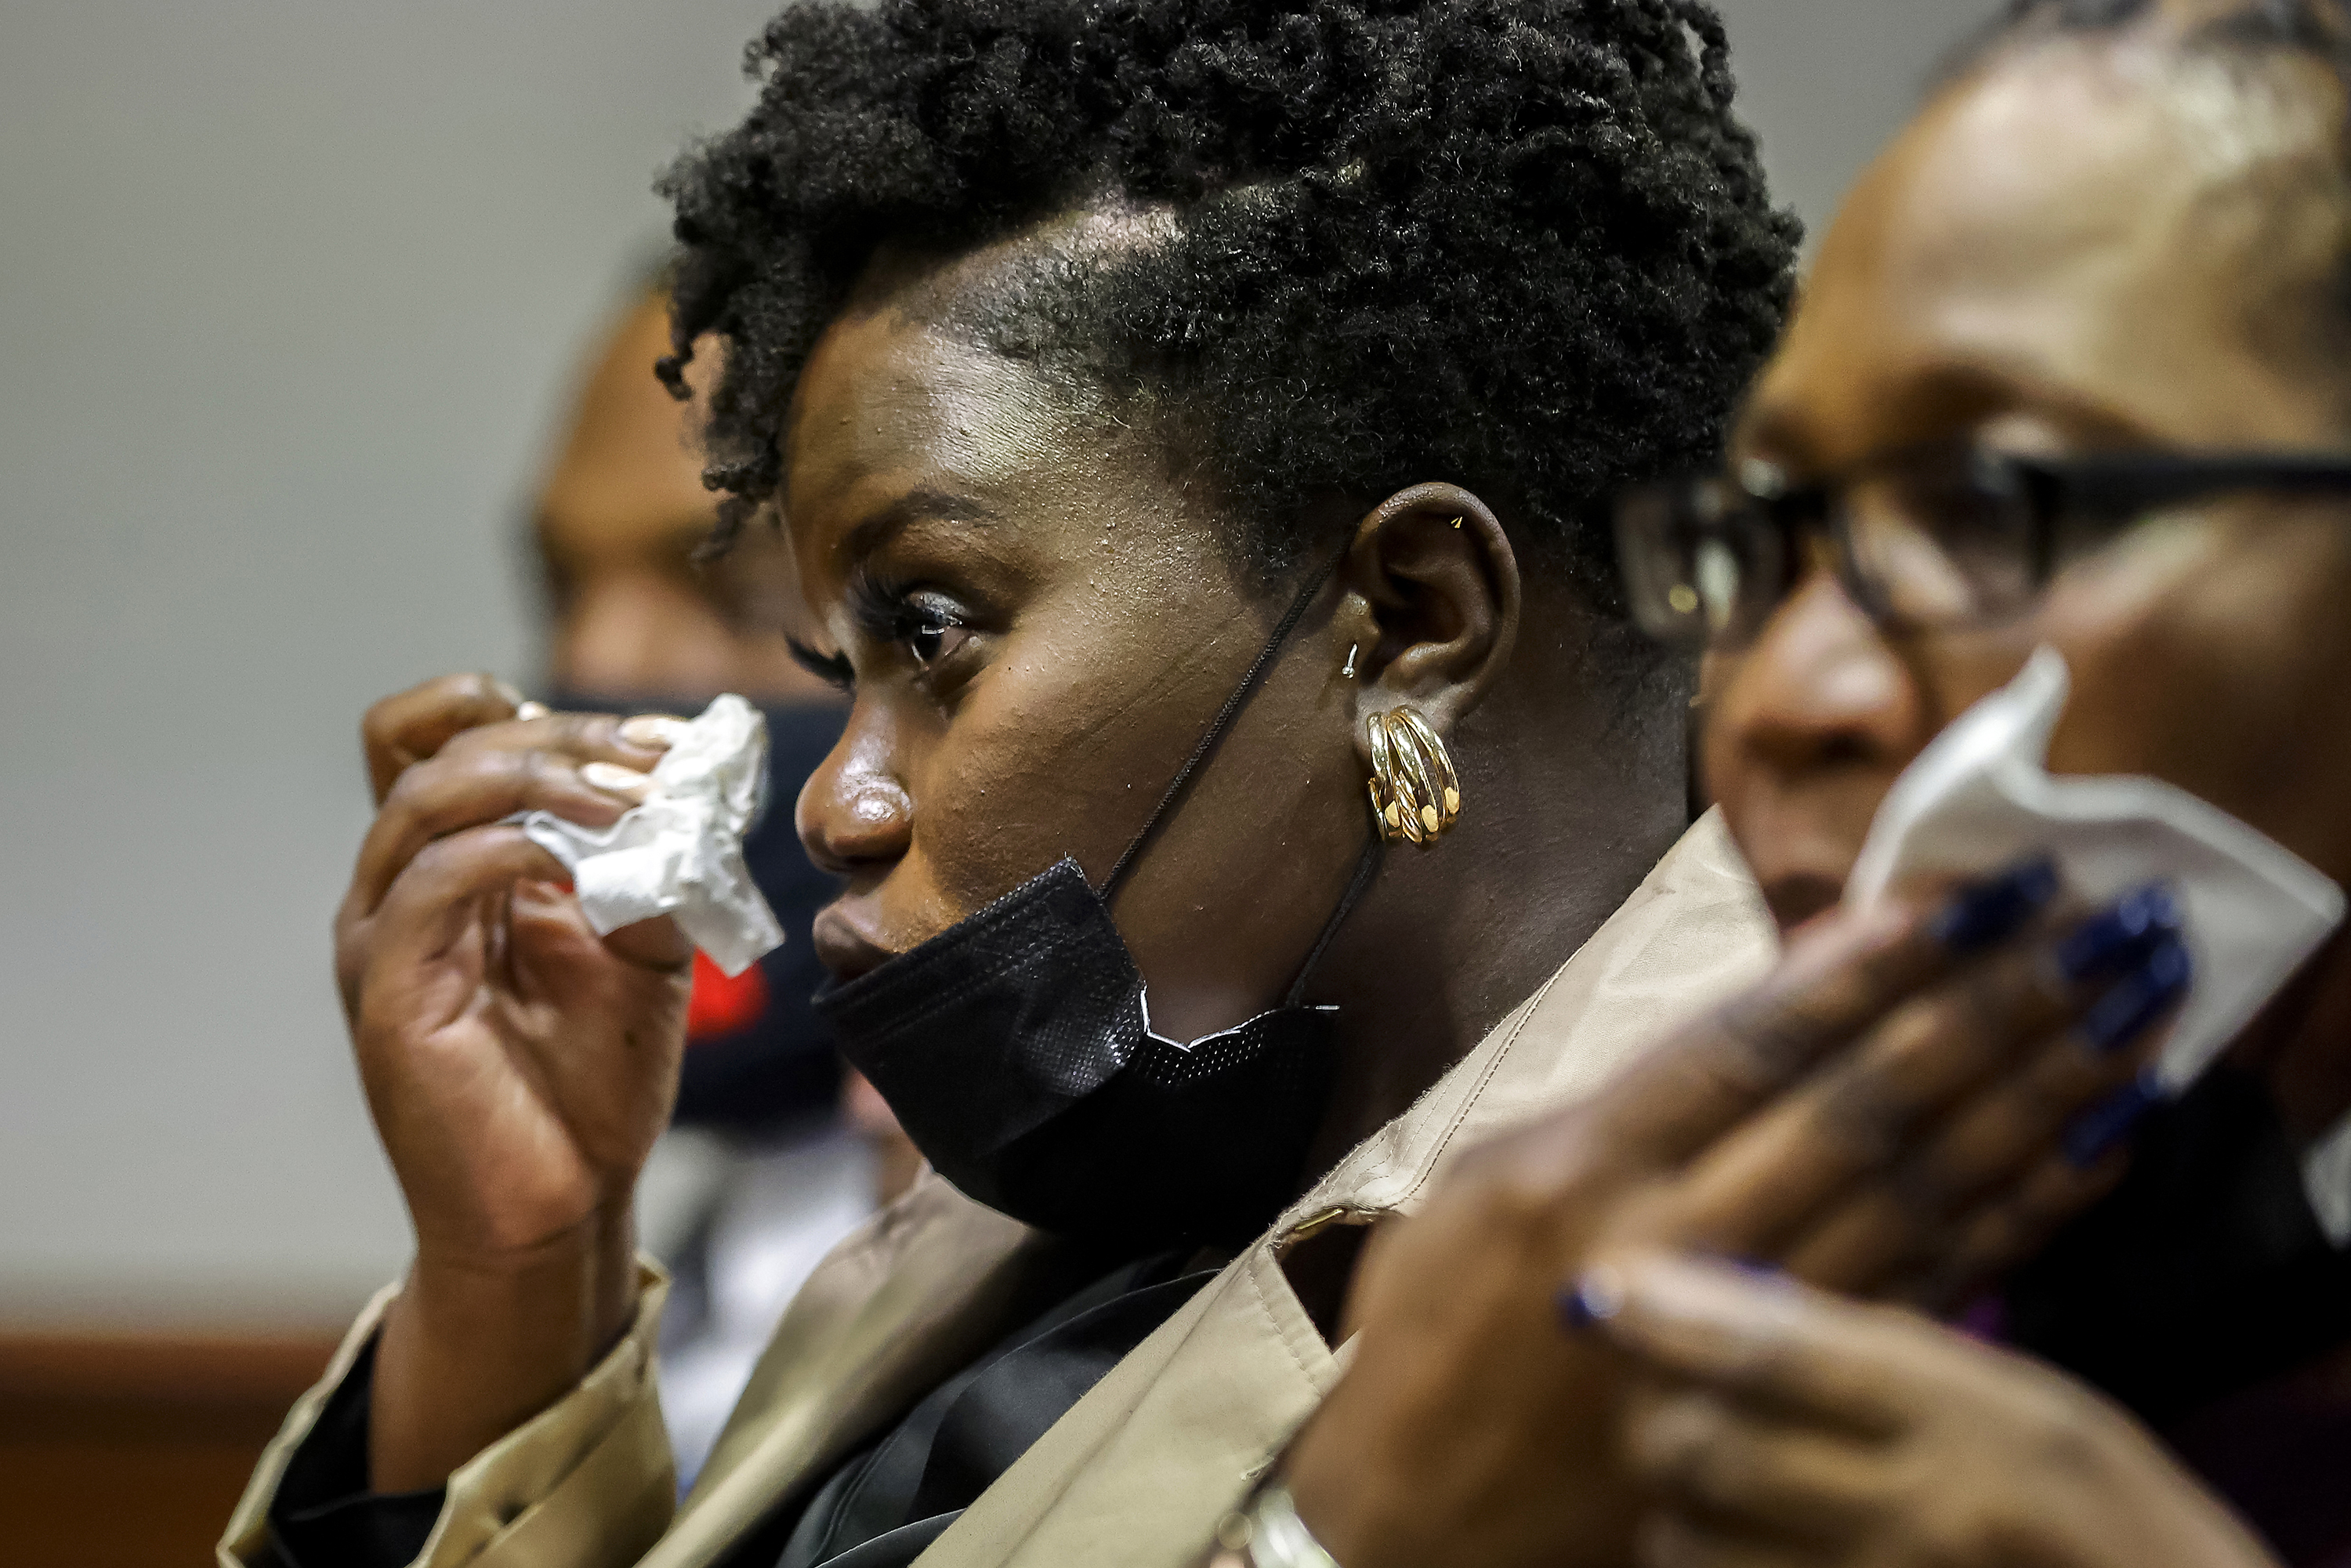 Ahmaud Arbery's sister Jasmine Arbery wipes a tear from her eyes in the Glynn County Courthouse, on January 7, 2022 in Brunswick, Georgia.